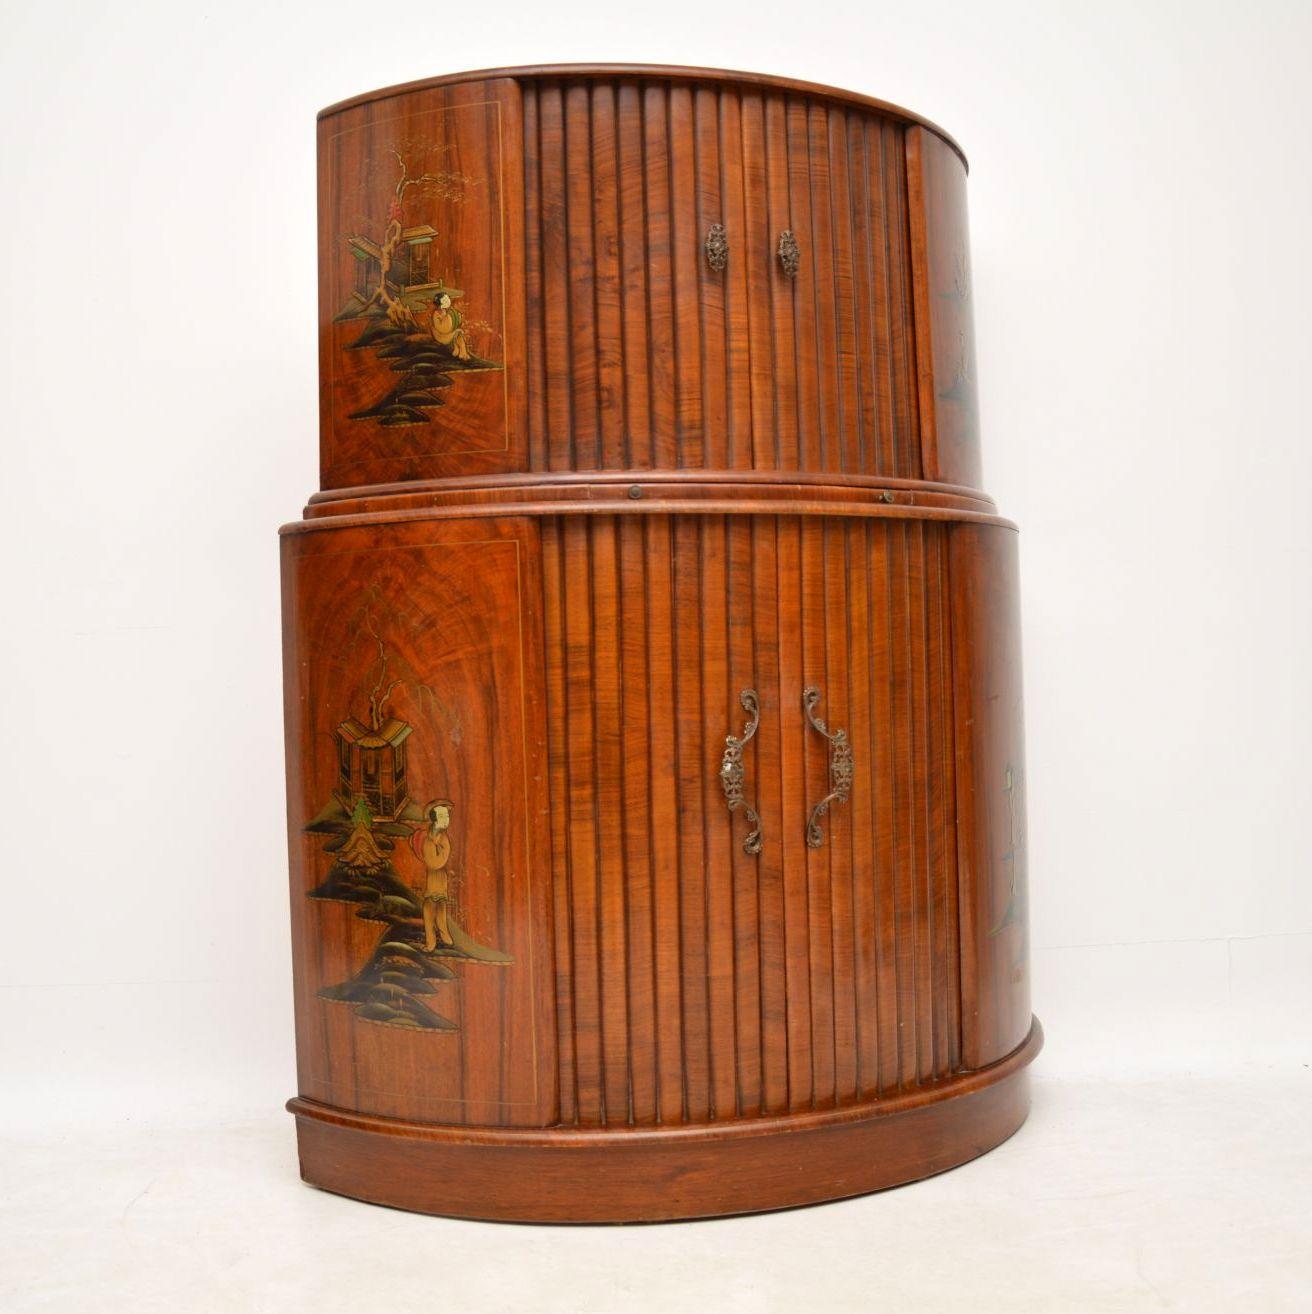 A beautiful and quite unusual vintage walnut cocktail cabinet from the Art Deco period, this dates from around the 1930s-1950s. It has a lovely demi lune shape, with tambour doors at the top and bottom, and ample storage space for glasses and